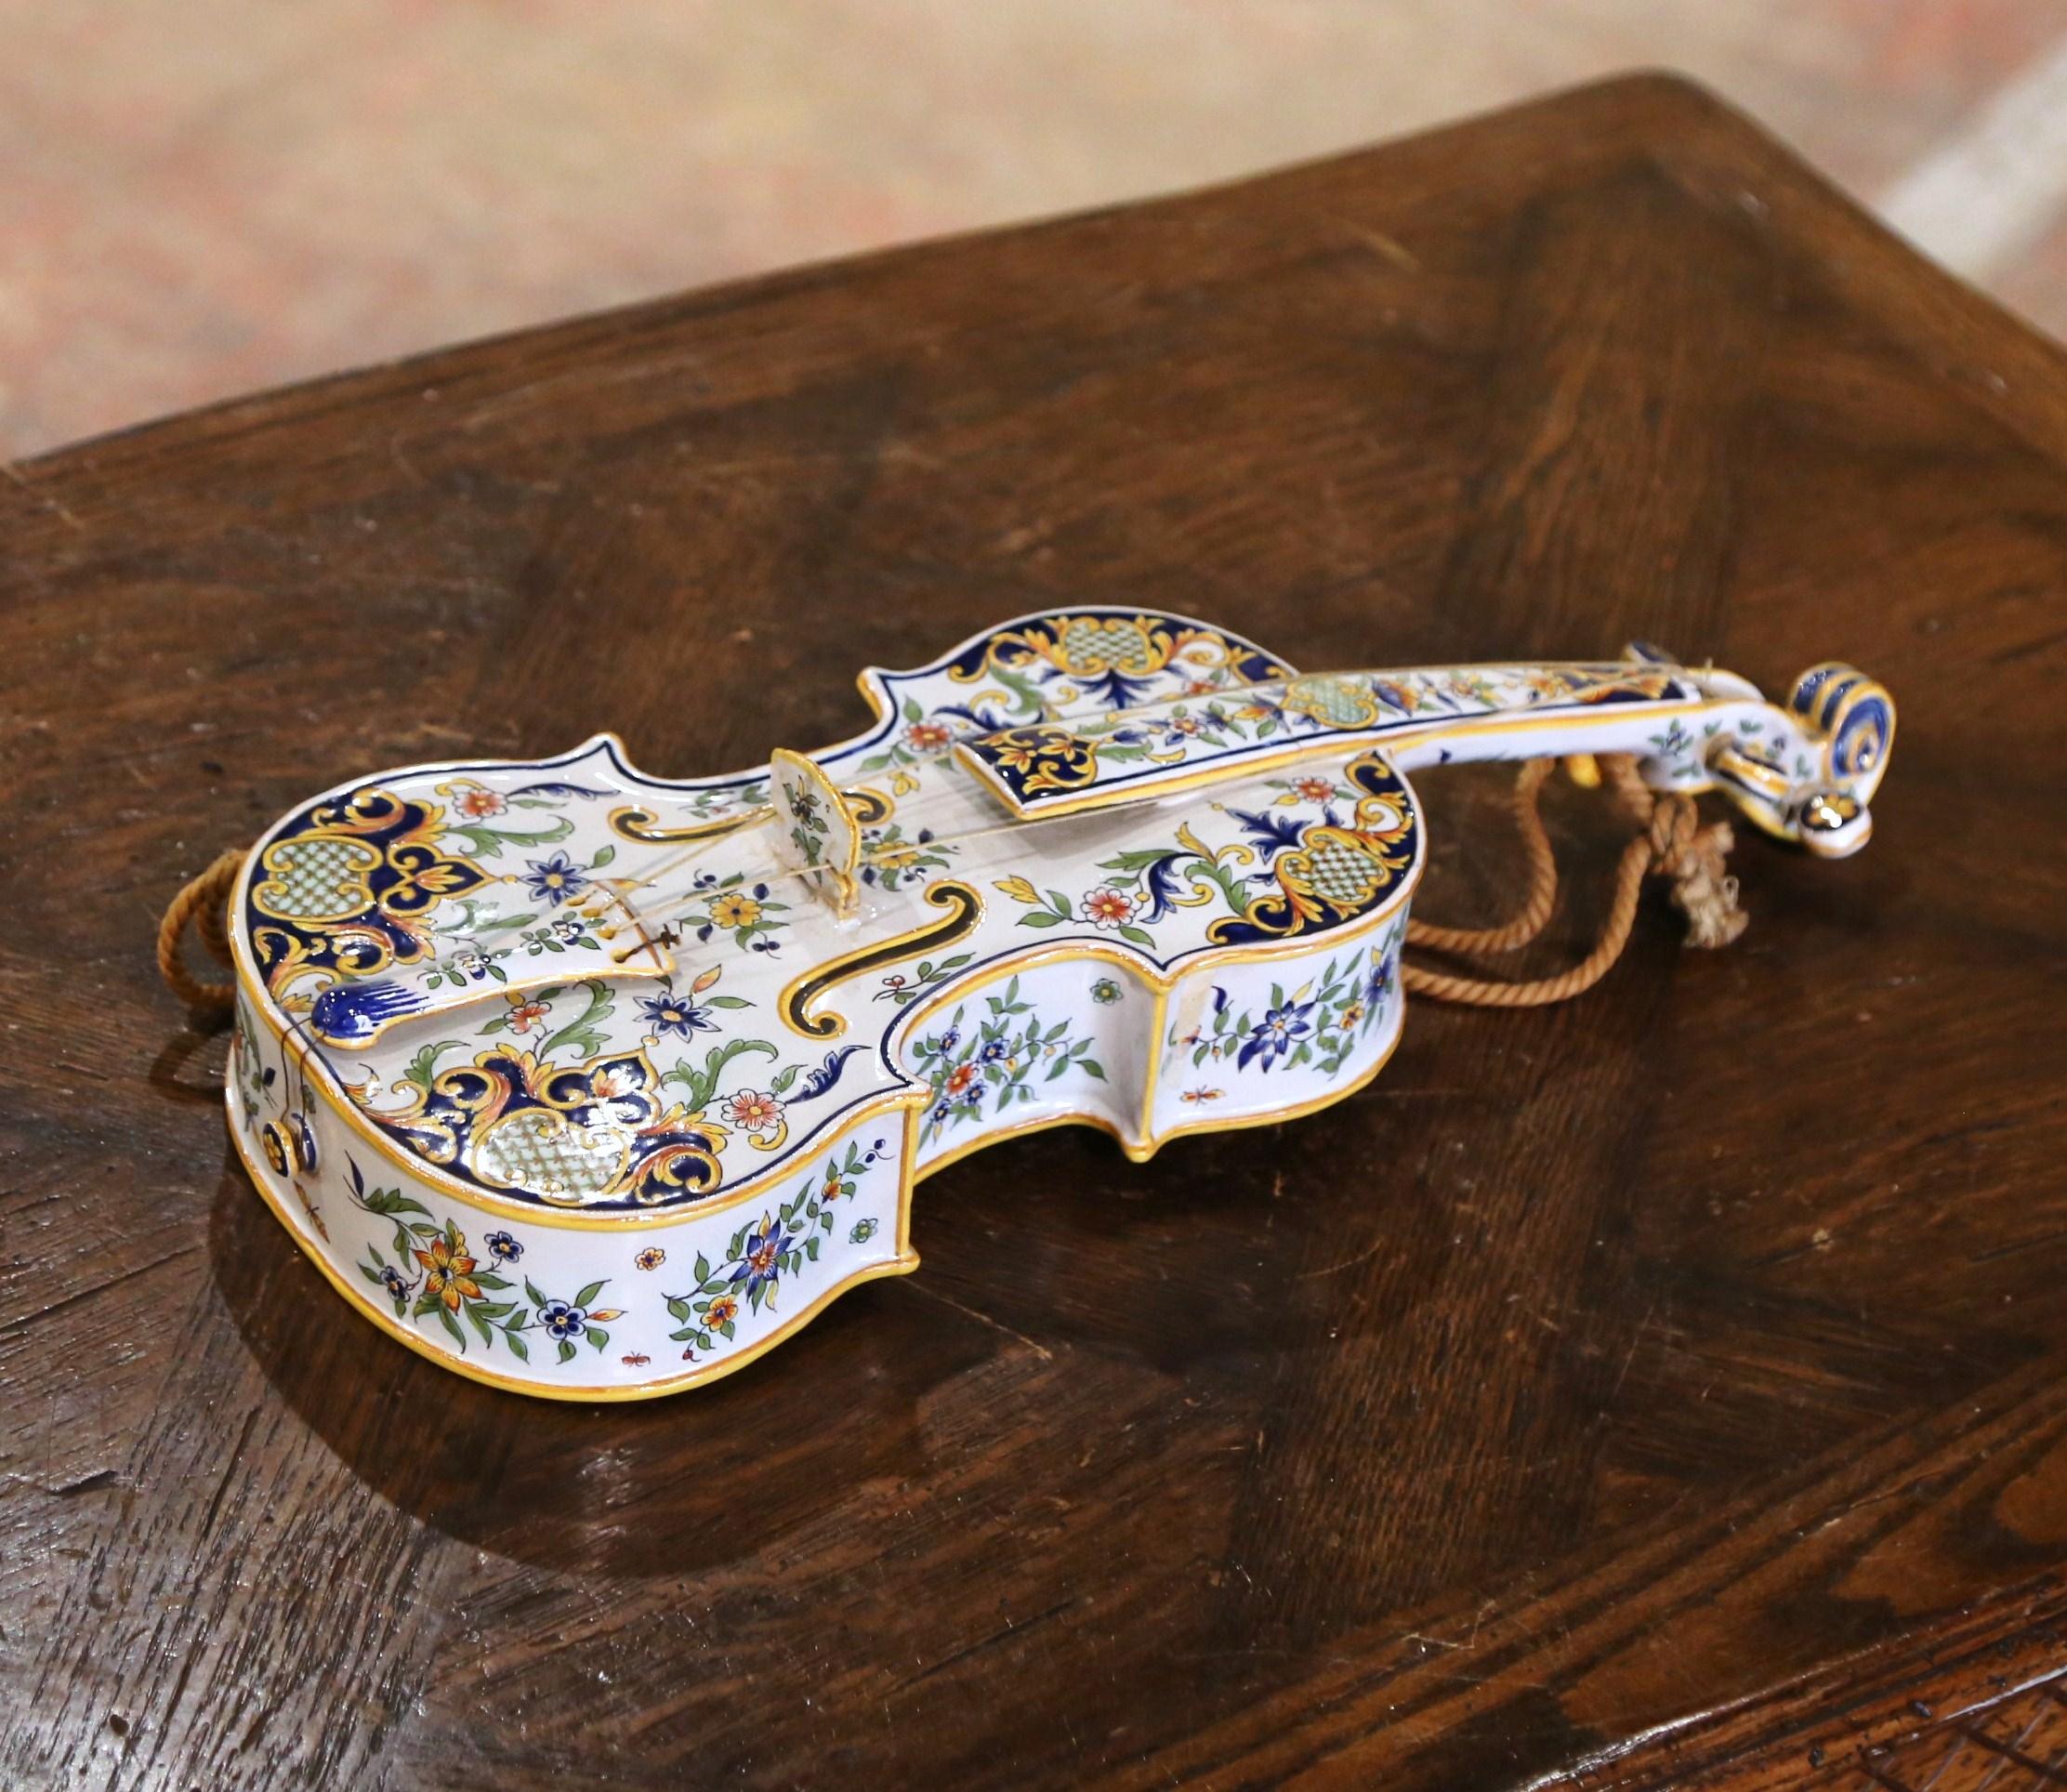 Decorate a wall with this interesting and colorful antique ceramic violin shape letter holder; crafted in the Normand city of Rouen, France, circa 1880, the colorful barbotine music instrument features hand painted floral decor in the traditional